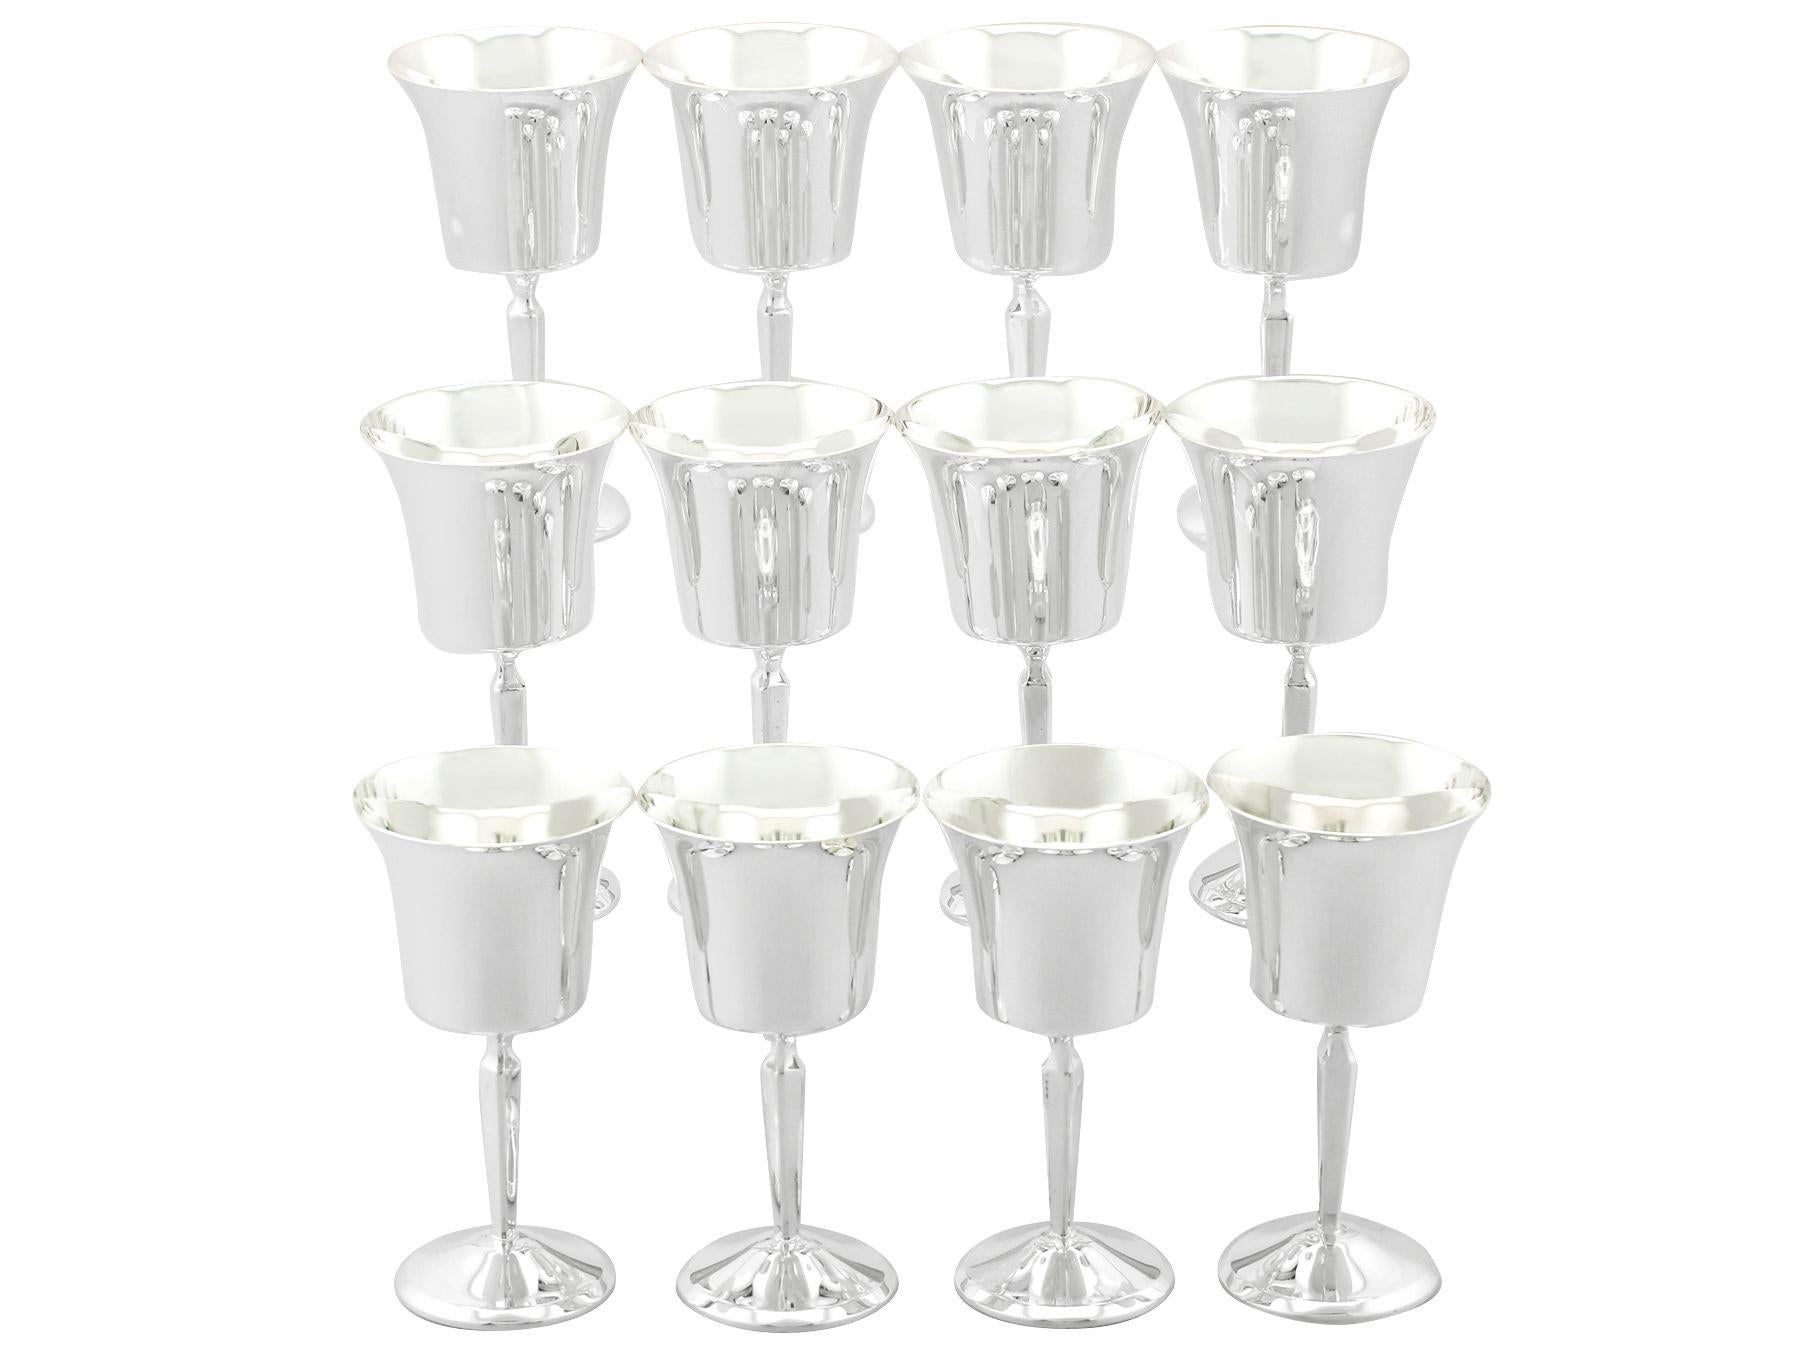 An exceptional, fine and impressive vintage Elizabeth II English sterling silver goblets; an addition to our range of wine and drink related silverware.

These exceptional vintage sterling silver goblets have a flared bell shaped form supported by